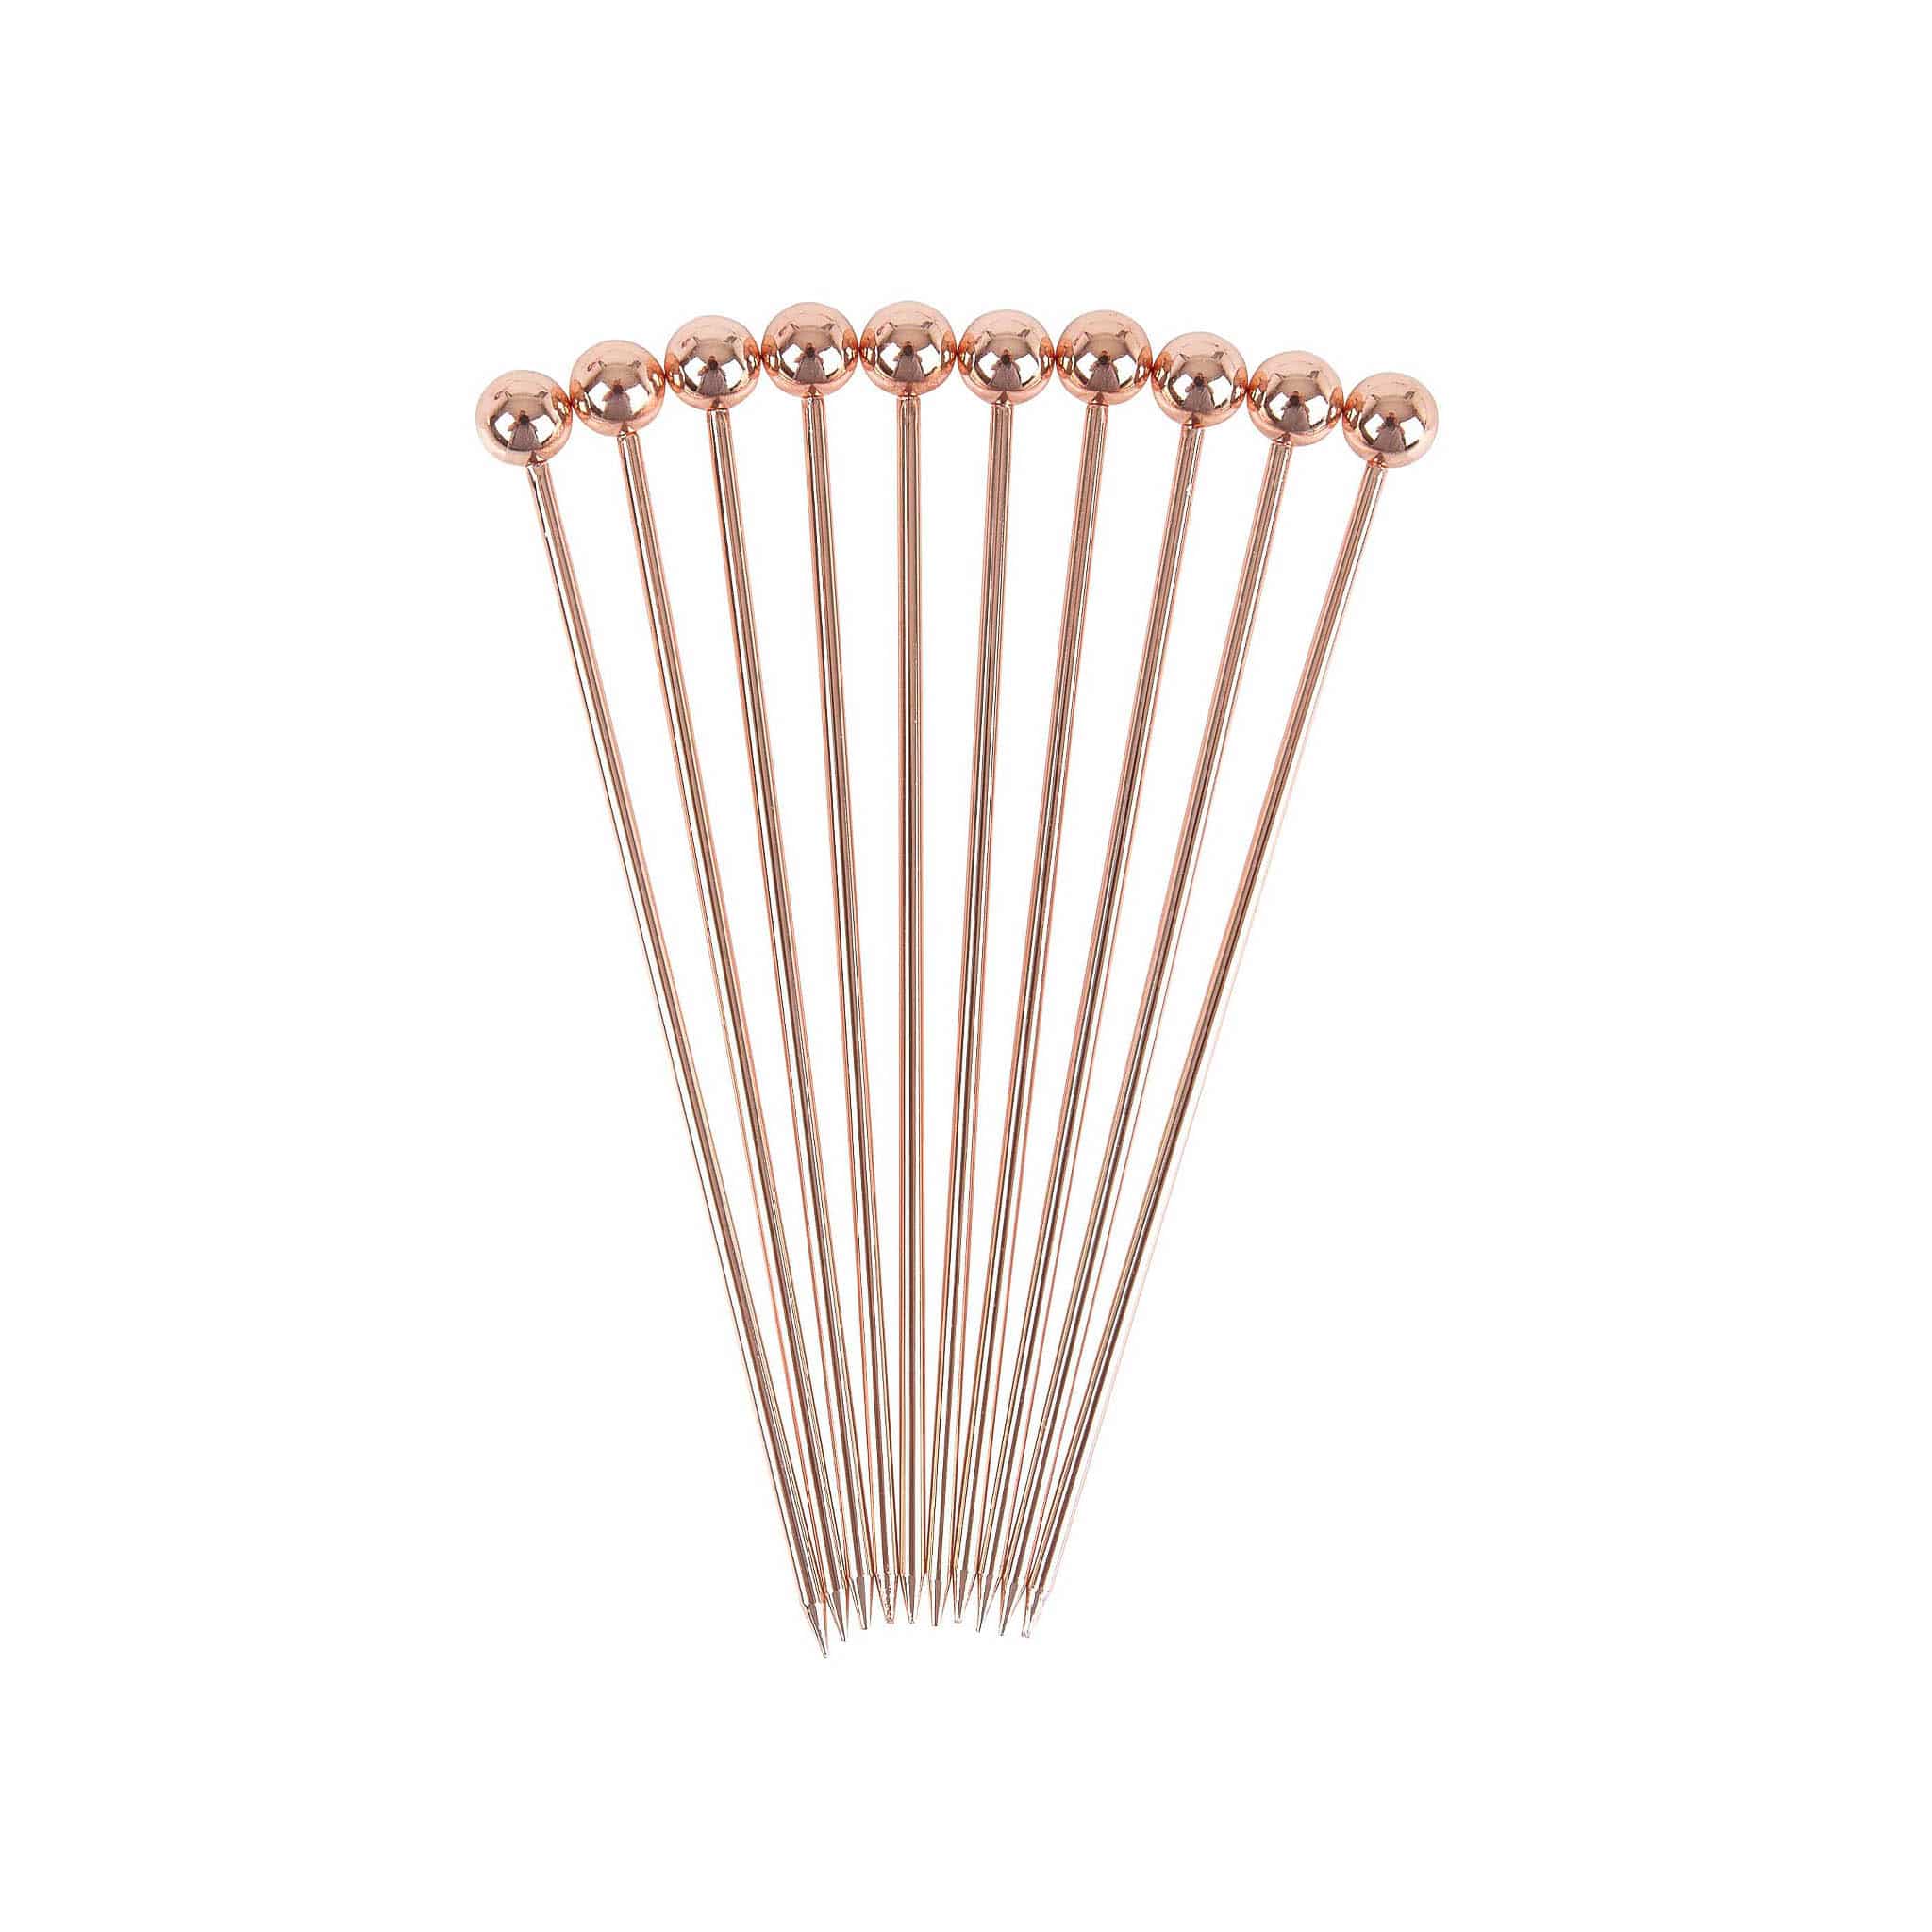 Pack of 10 Copper Plated Garnish Cocktail Picks